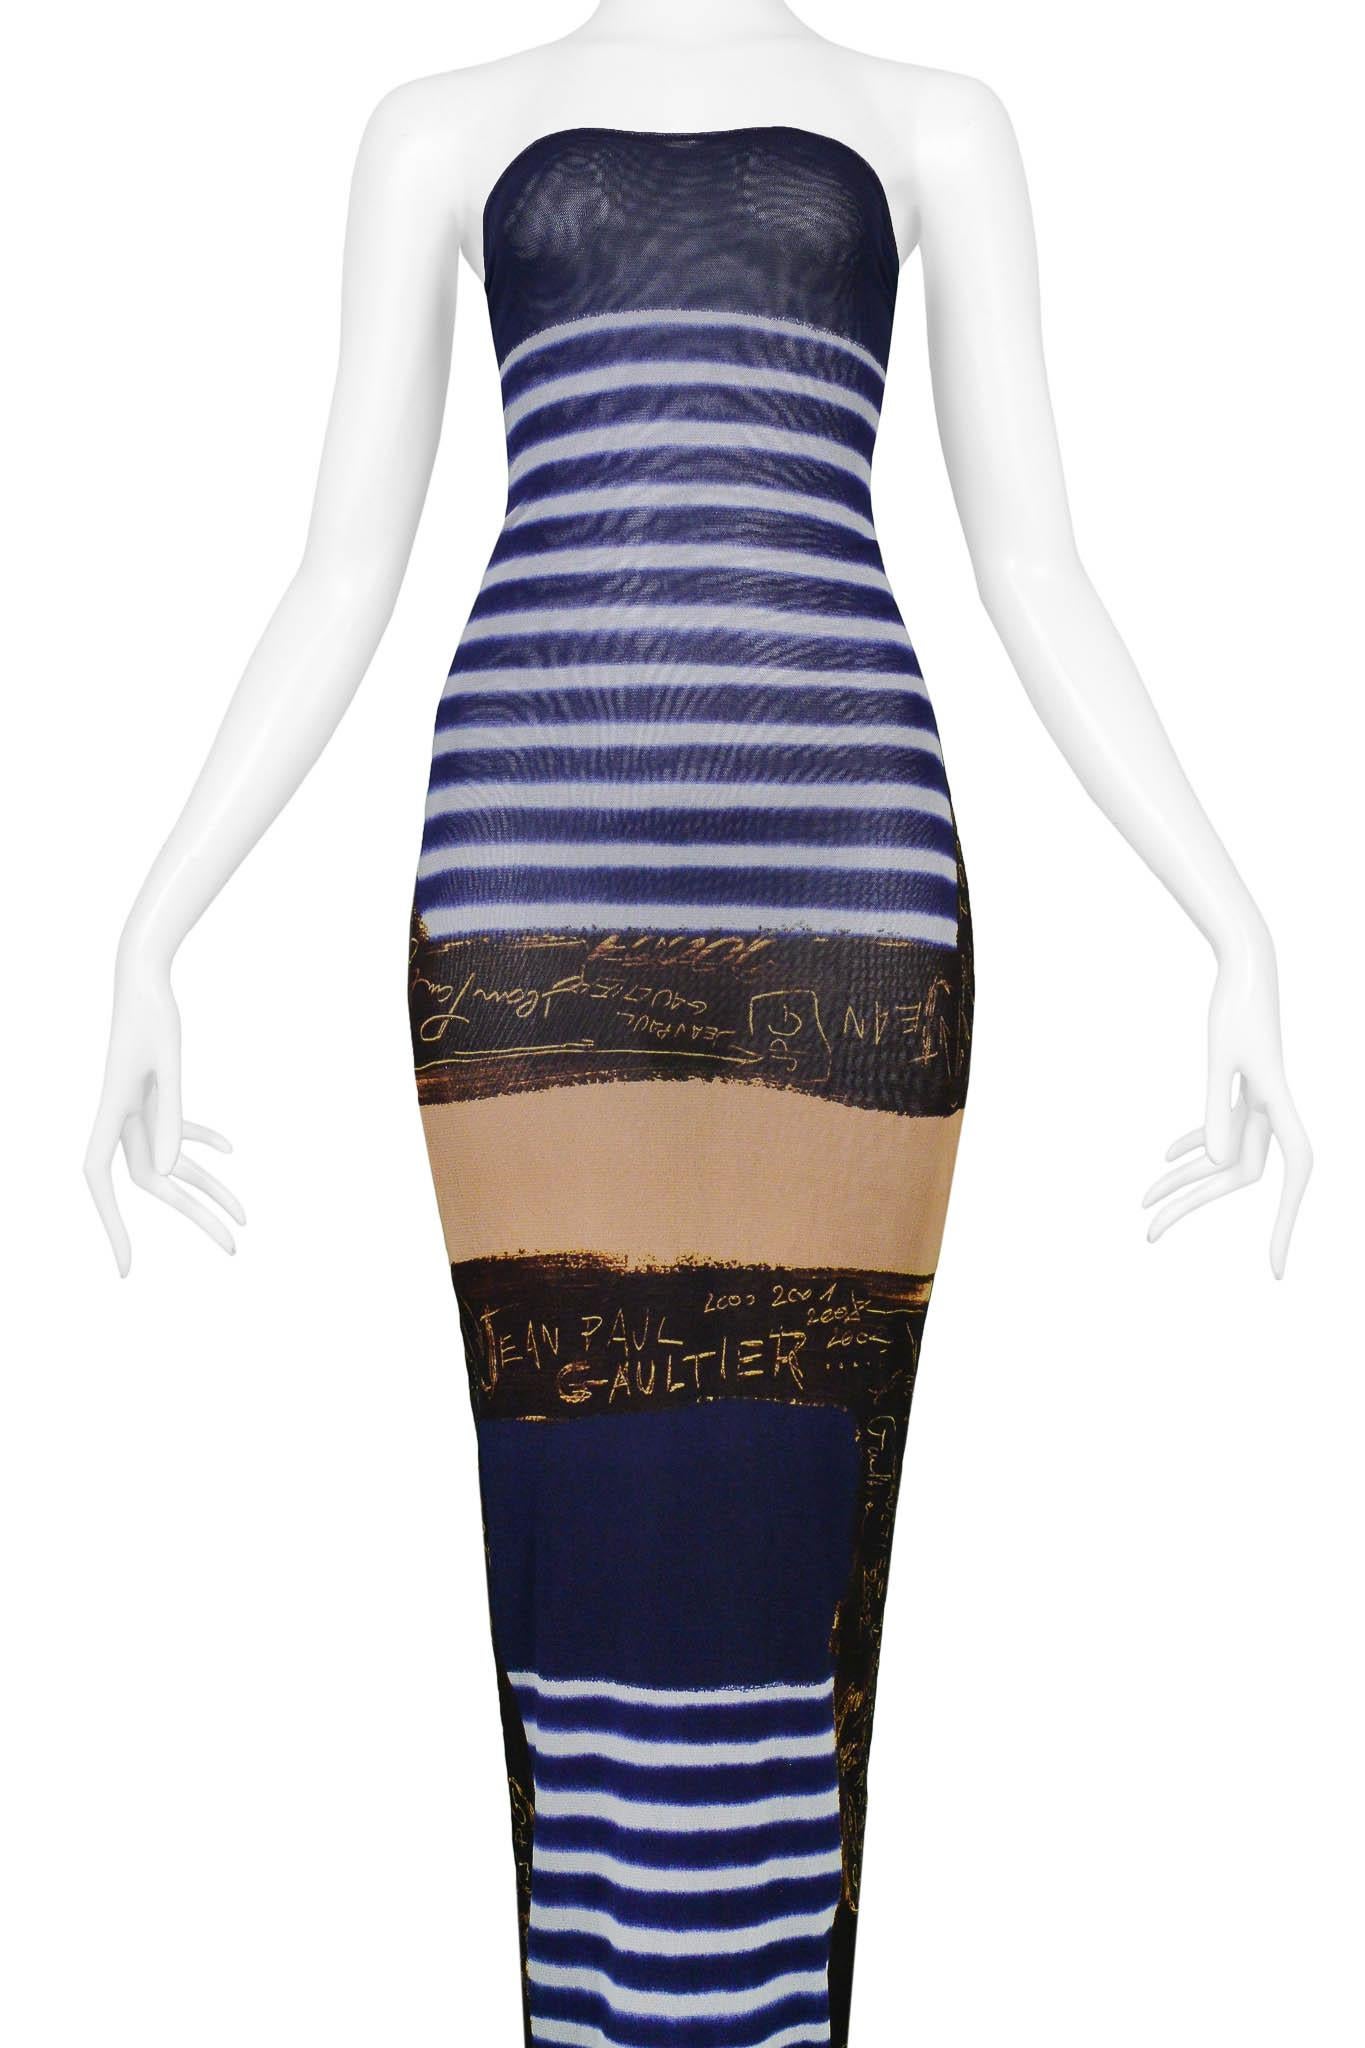 Women's Jean Paul Gaultier French Nautical Striped Mesh Dress With Signature Print 2001